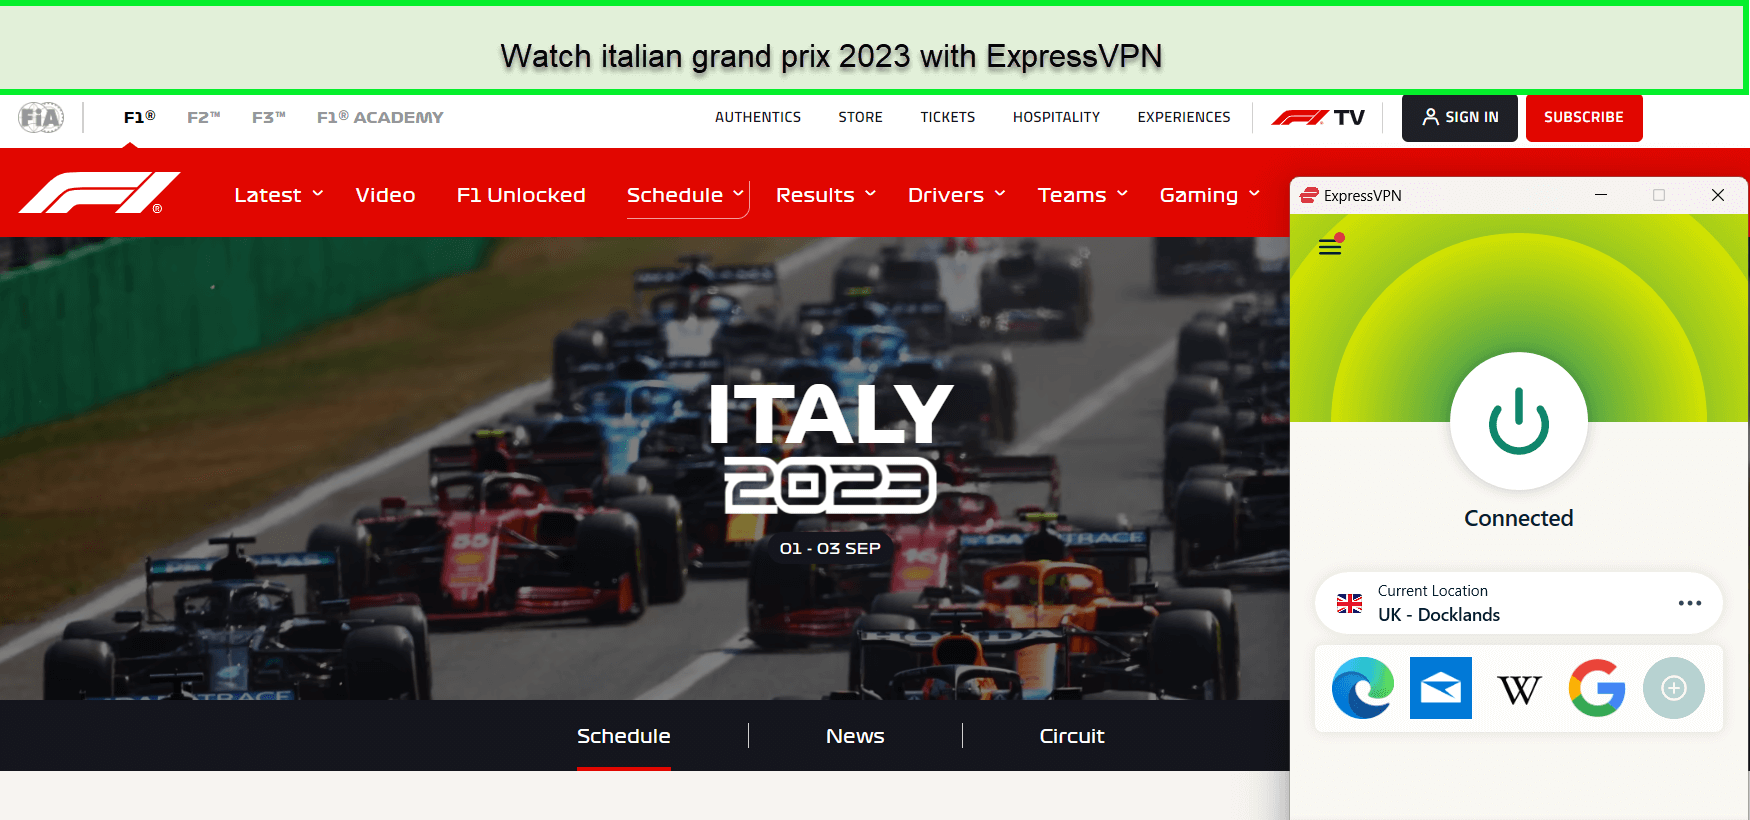 How-to-Watch-Italian-Grand-Prix-2023-in-USA-on-ITV-with-ExpressVPN